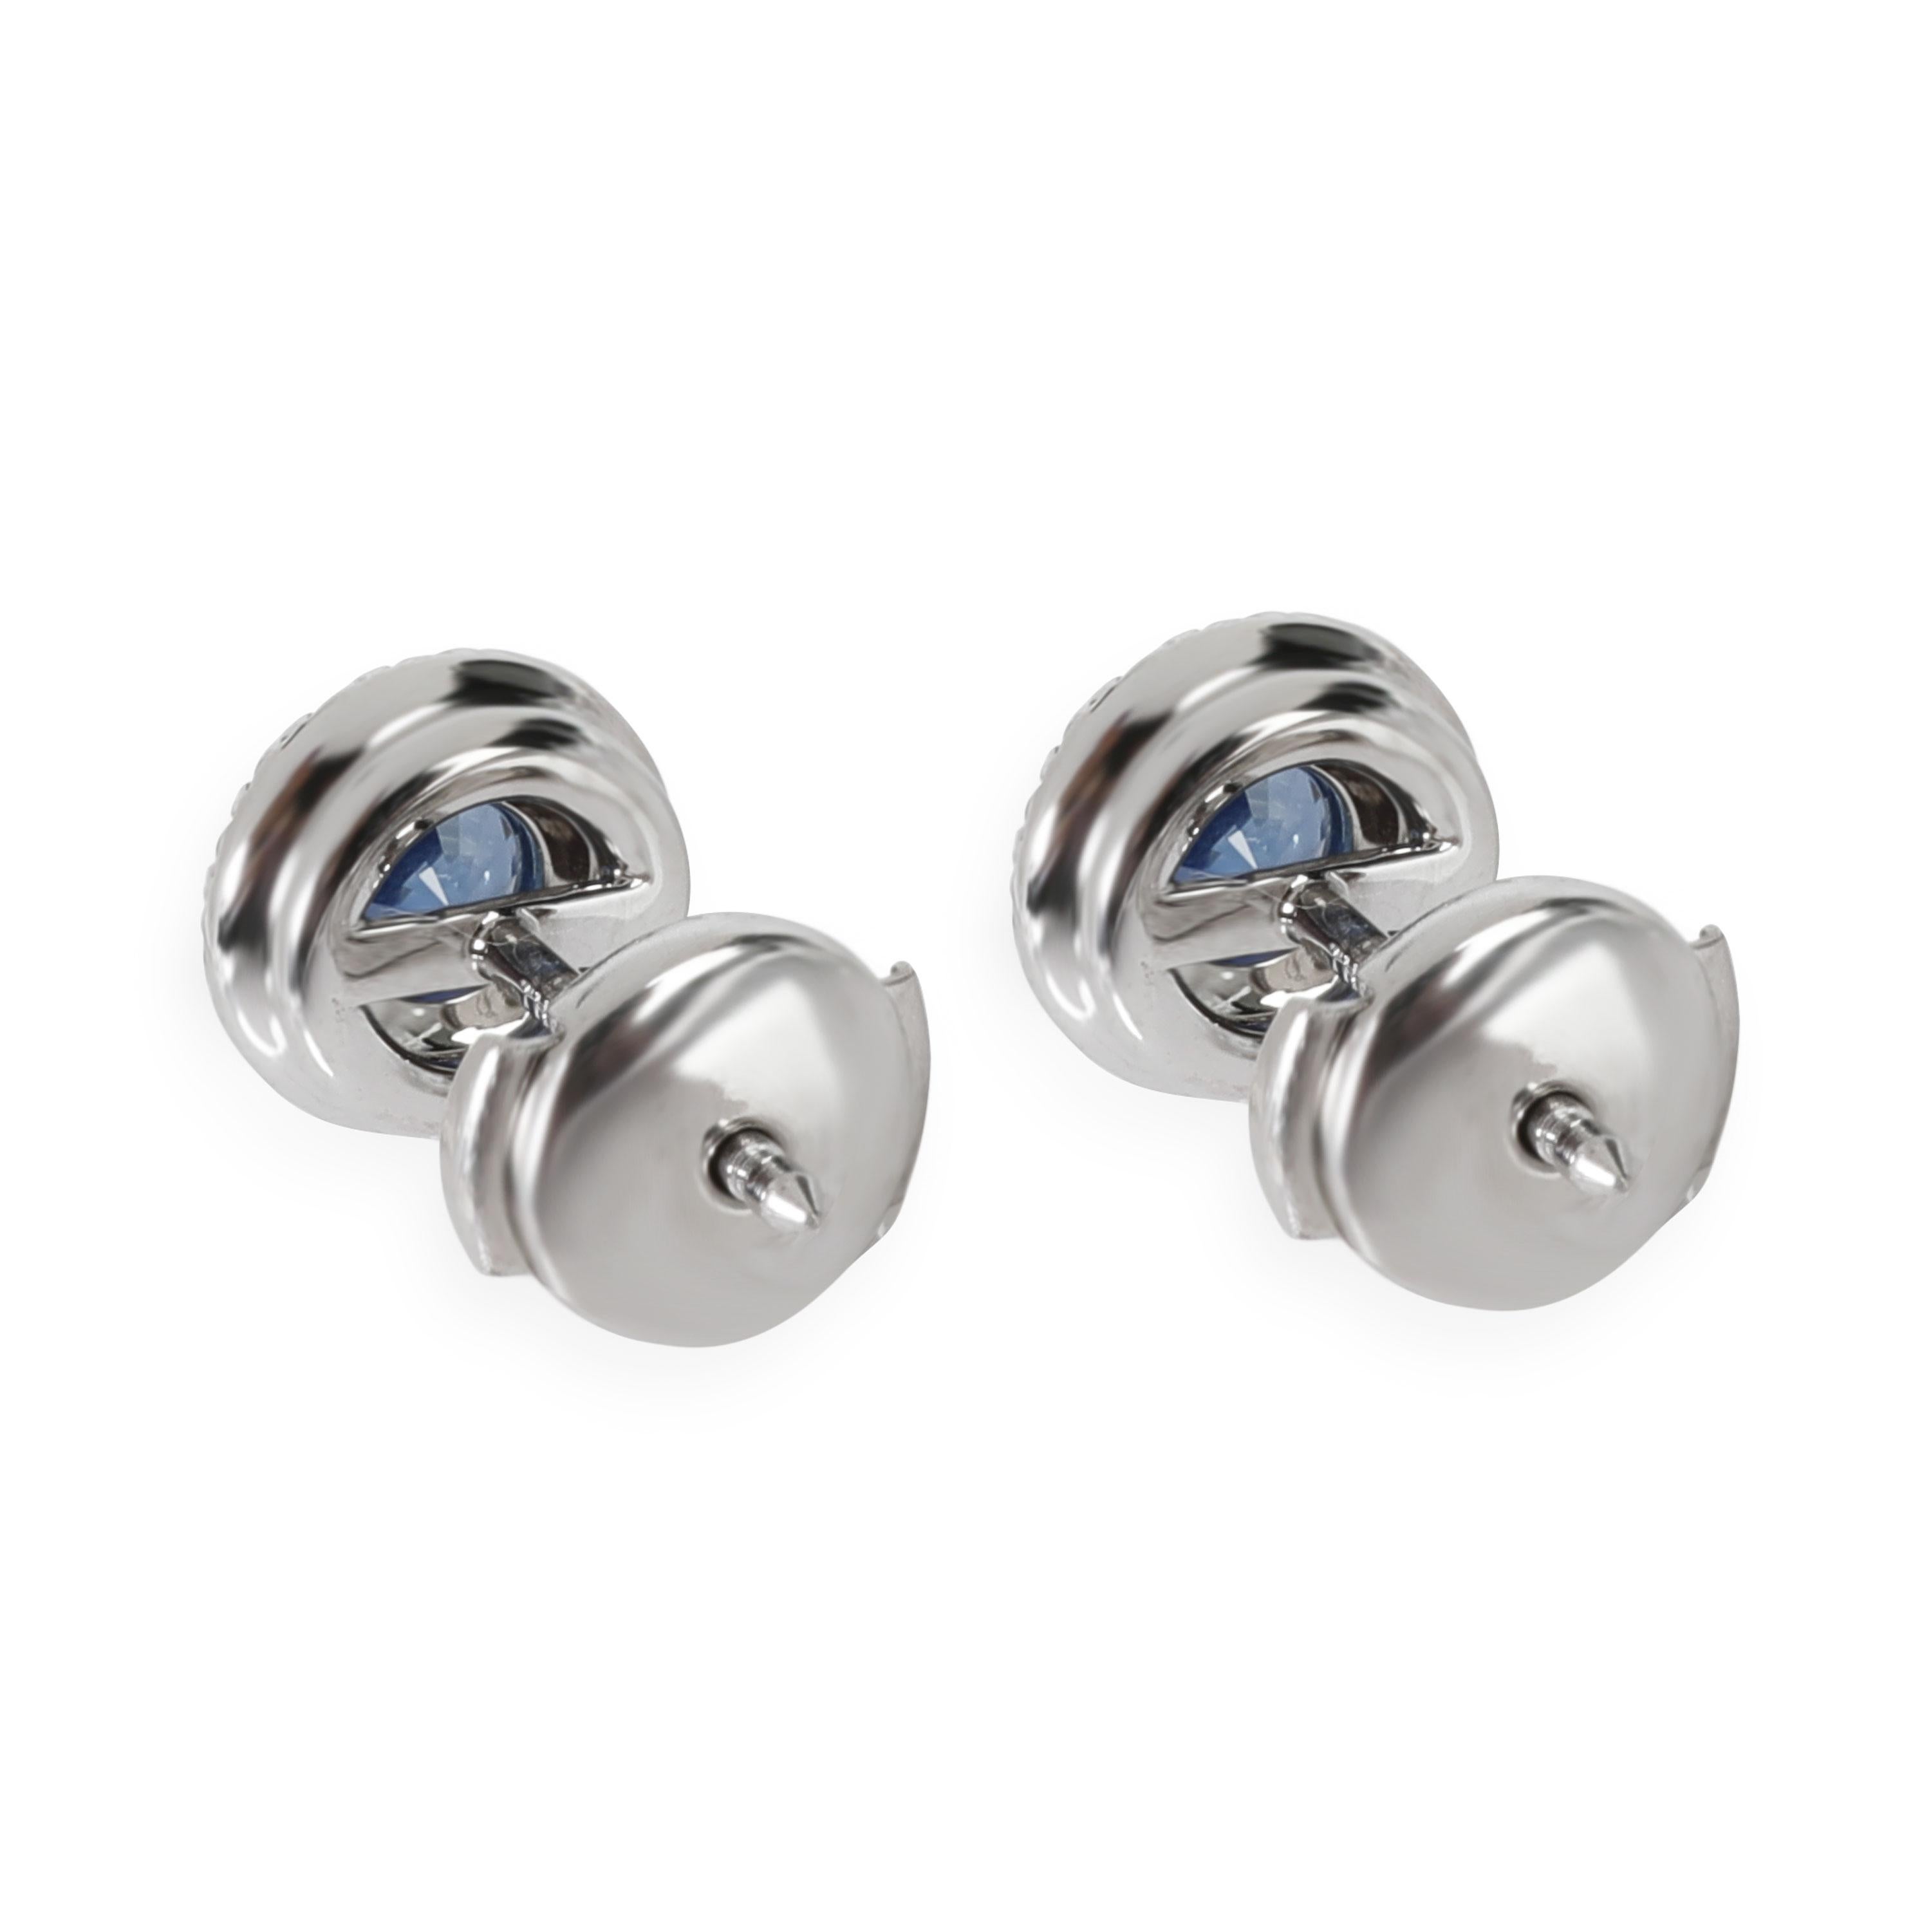 Tiffany & Co. Soleste Sapphire Diamond Stud Earring in Platinum 0.18 CT

PRIMARY DETAILS
SKU: 114081
Listing Title: Tiffany & Co. Soleste Sapphire Diamond Stud Earring in Platinum 0.18 CT
Condition Description: Retails for 7600 USD. In excellent